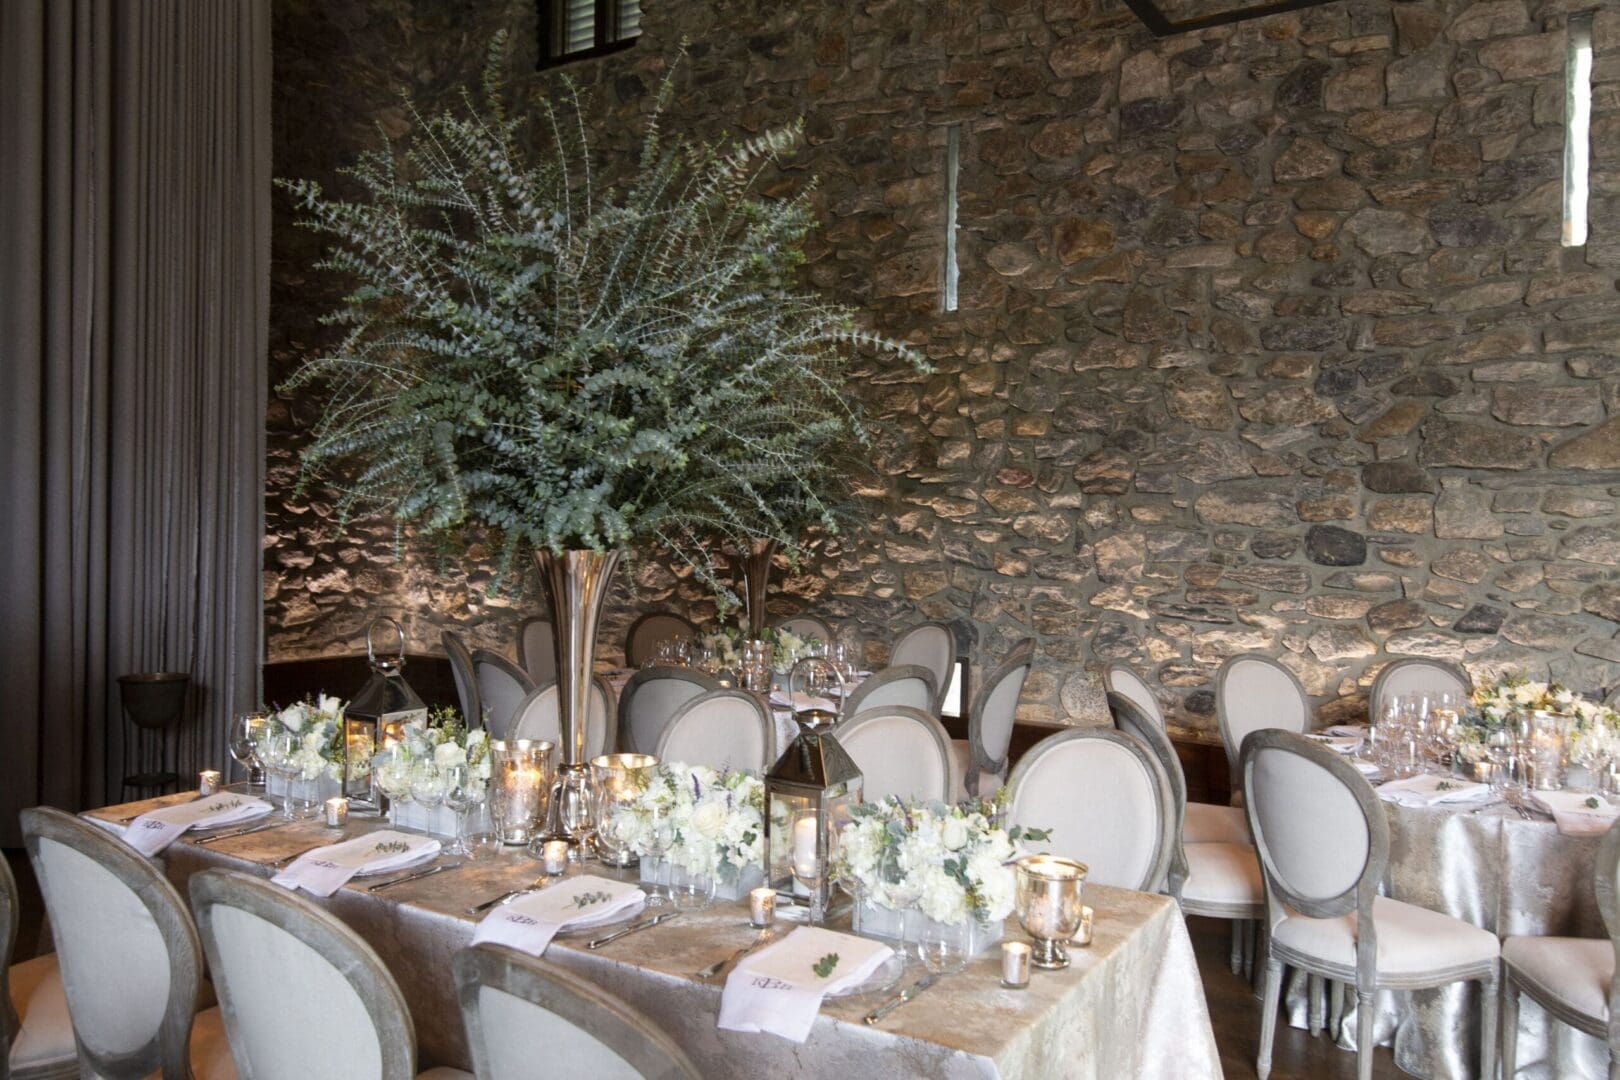 A wedding reception set up in a stone room, featuring enchanting wedding table scape ideas.